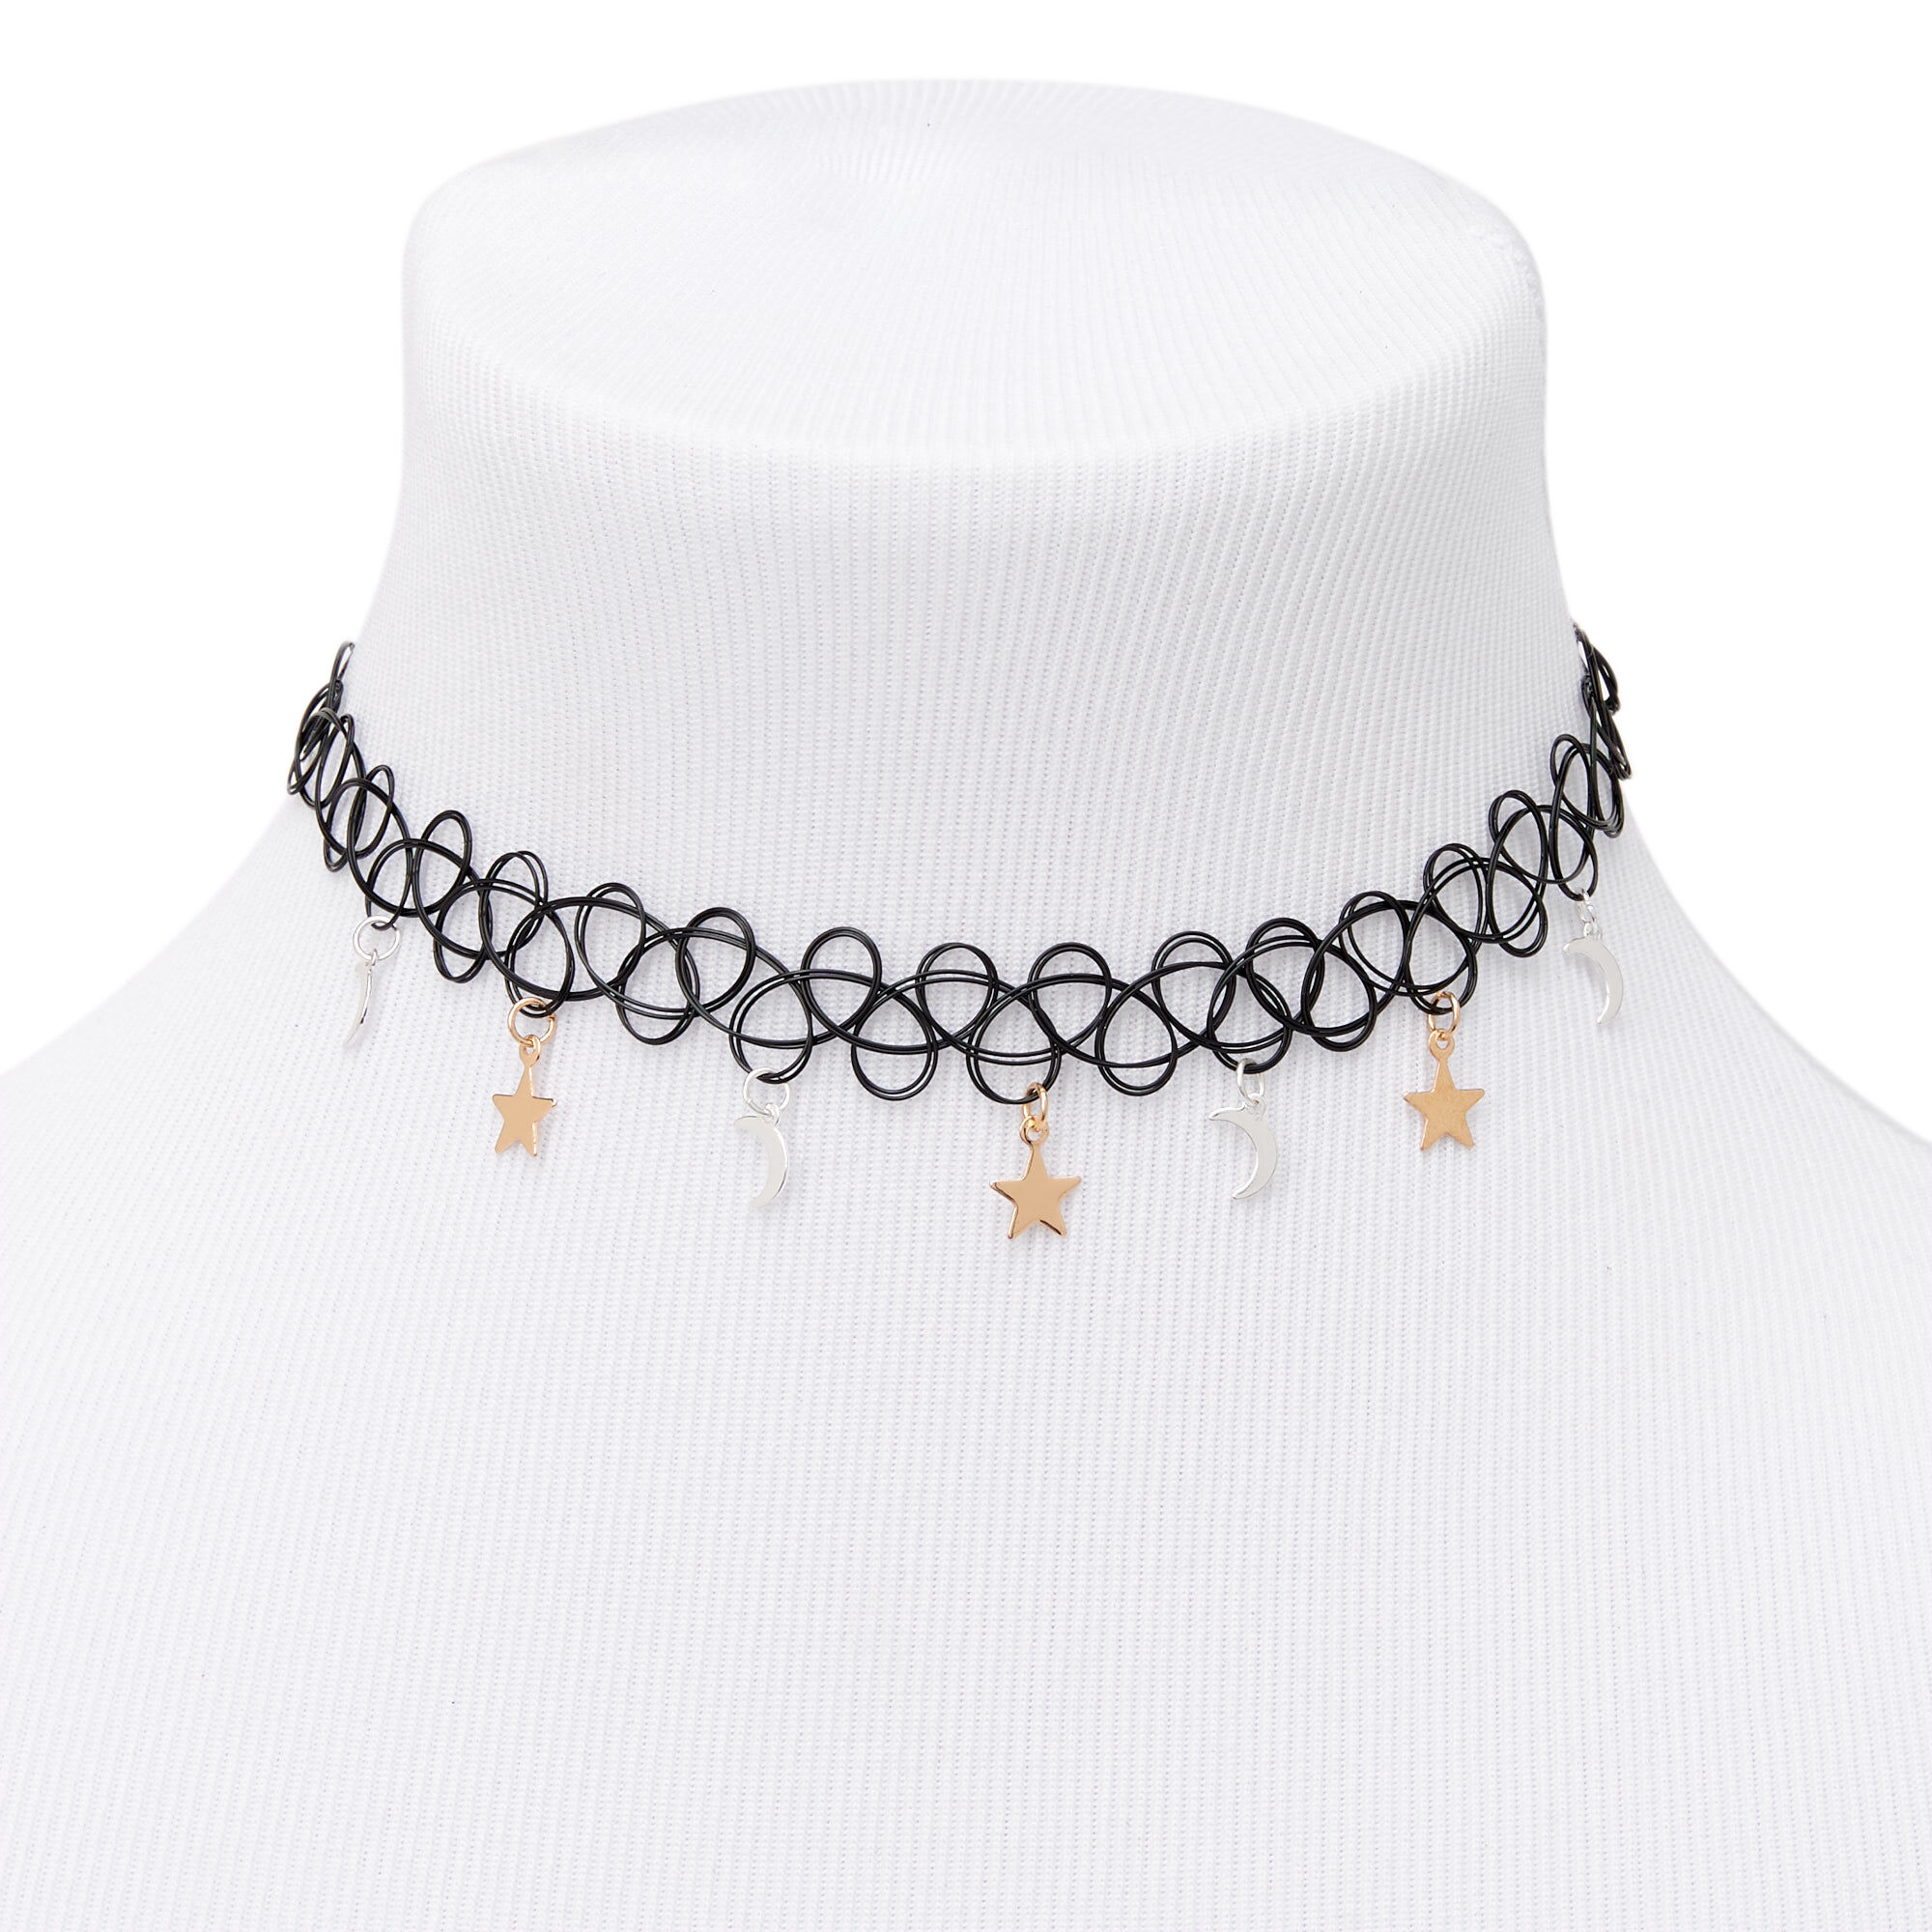 View Claires Mixed Metal Celestial Tattoo Choker Necklace Black information